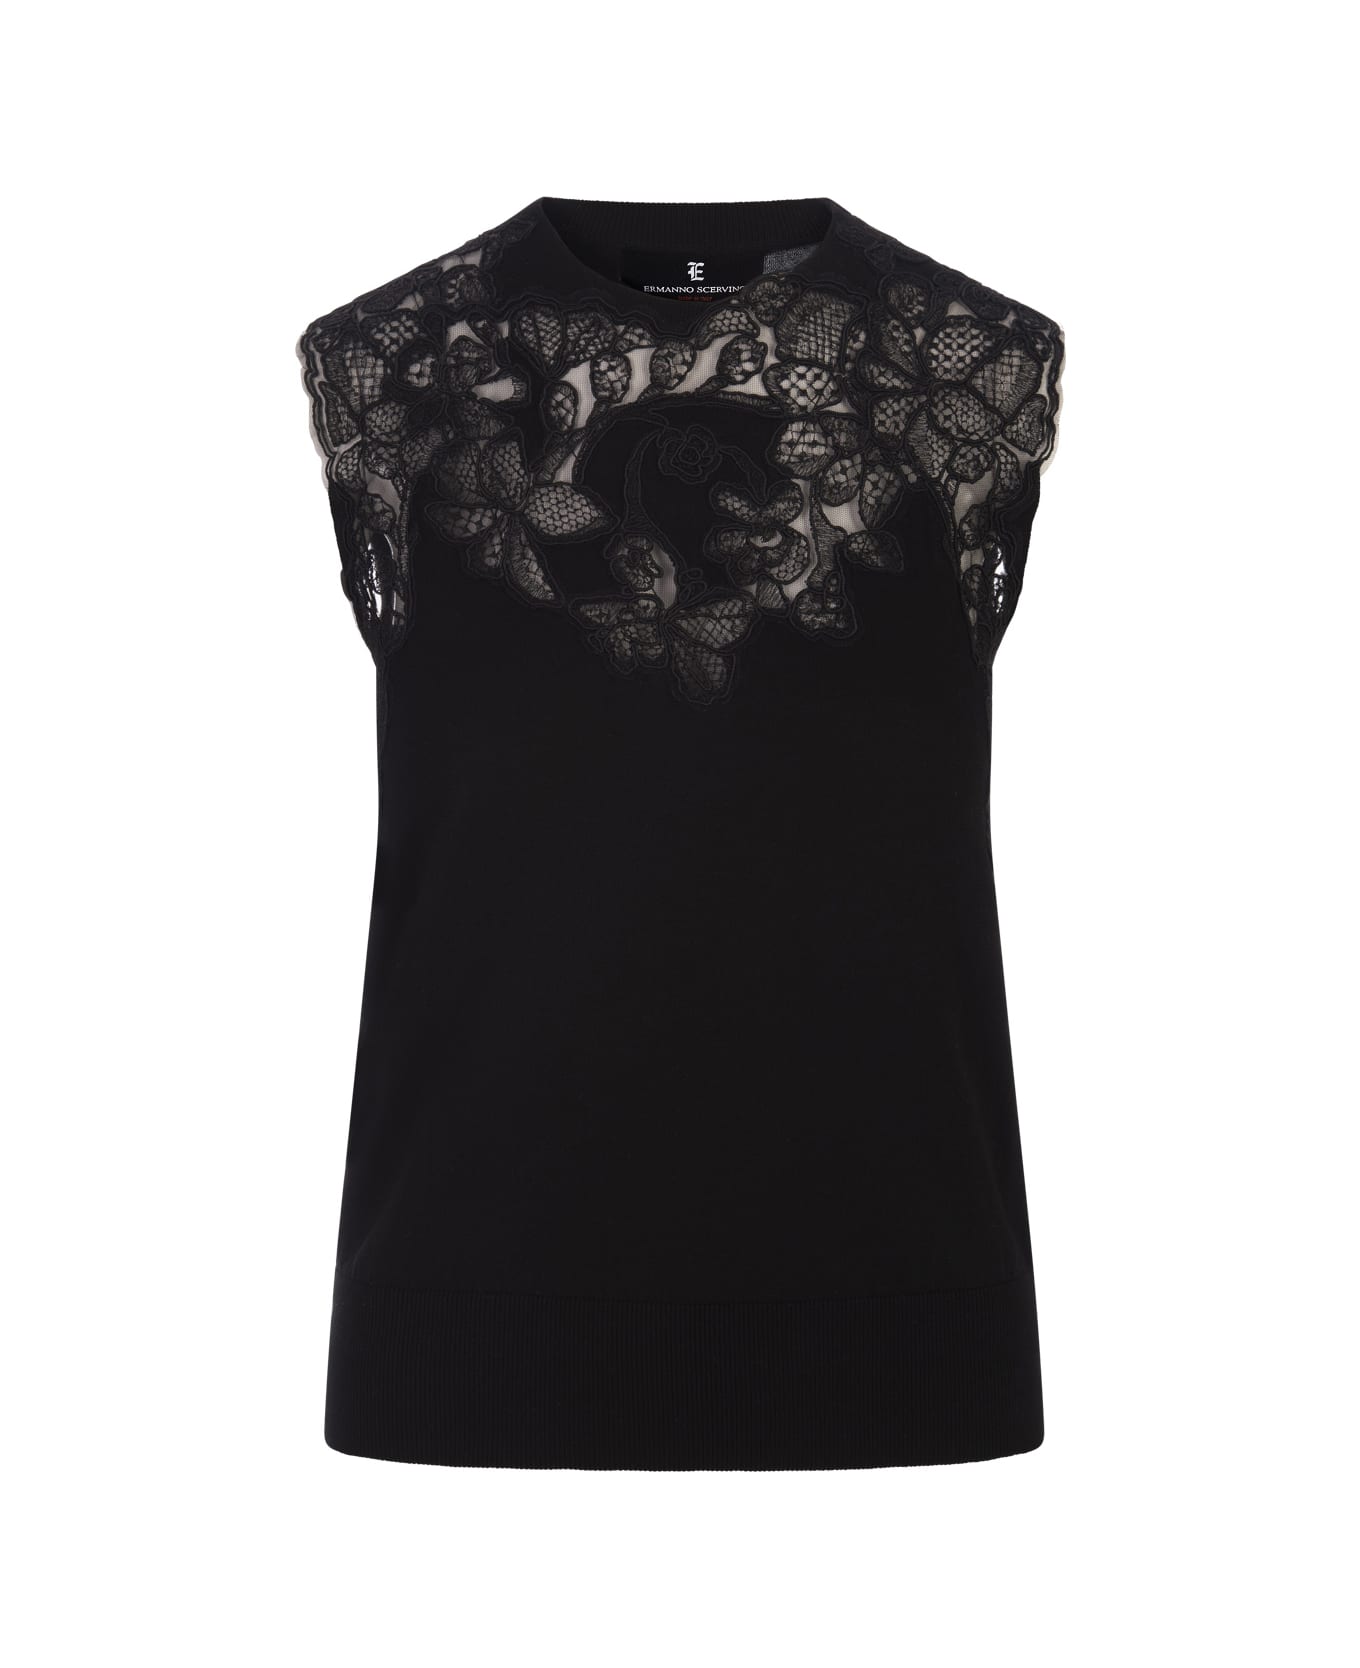 Ermanno Scervino Black Knitted Sleeveless Top With Lace - Black